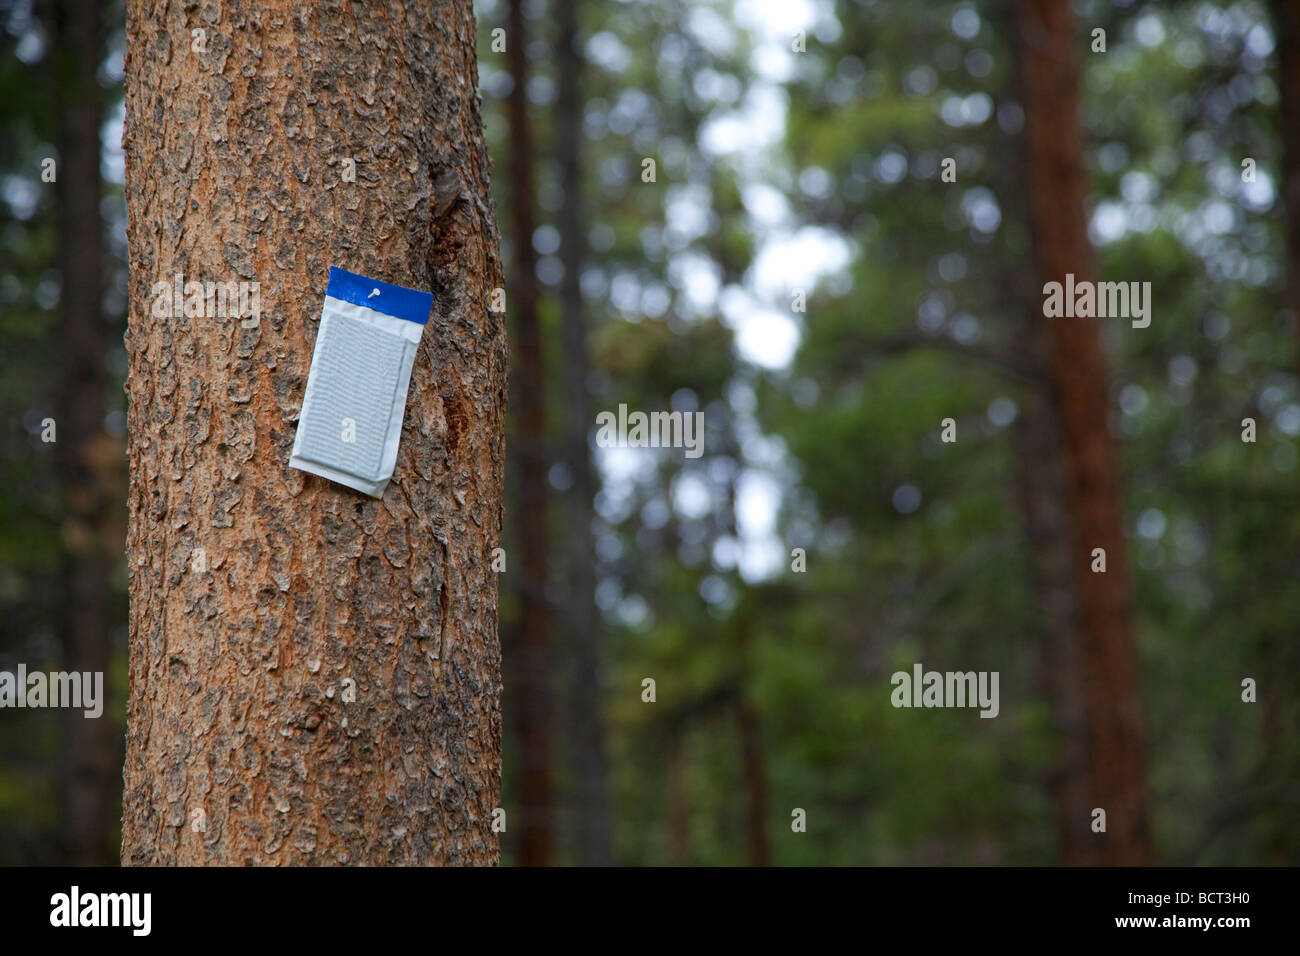 A pheromone packet is hung on a tree in the hopes of repelling pine beetles which are killing millions of acres of pine trees. Stock Photo